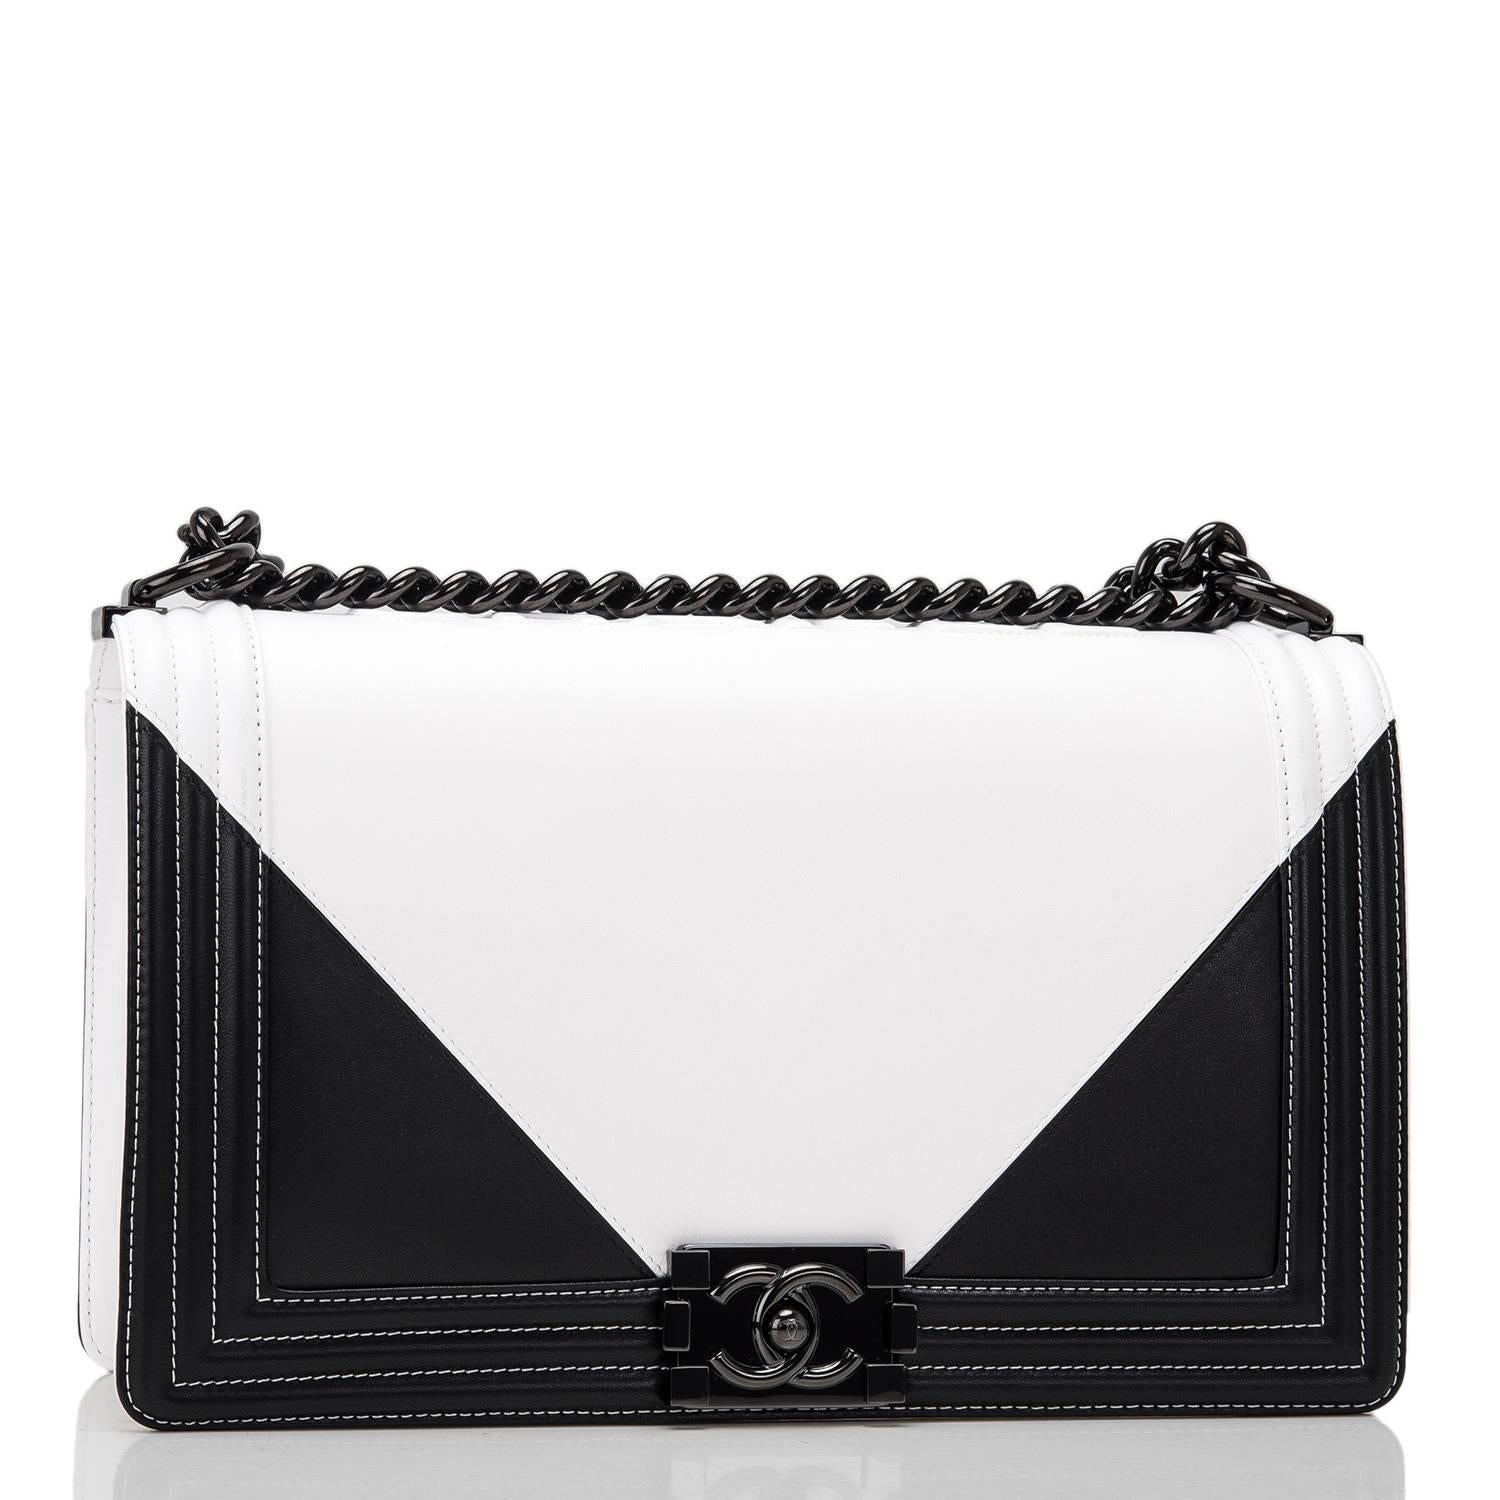 Chanel New Medium Boy bag of black and white lambskin leather and black hardware.

This Chanel bag is in the Boy style with a full front flap with the Boy signature CC push lock closure, white stitching, smooth leather trim and black metal chain